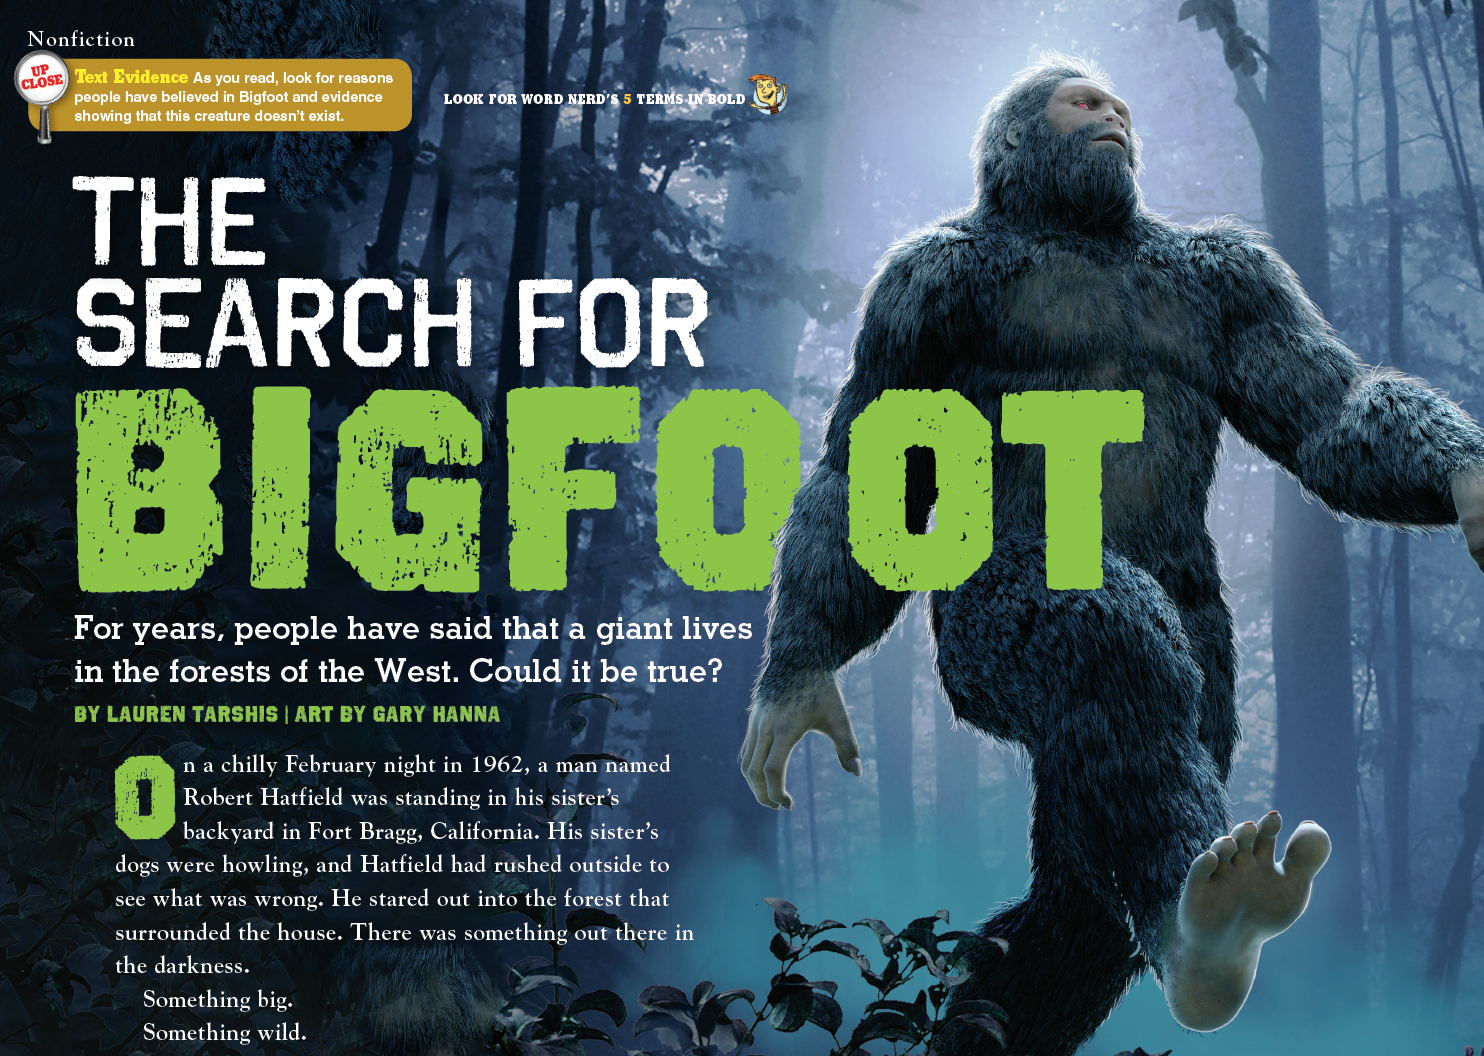 Using big data to search for Bigfoot